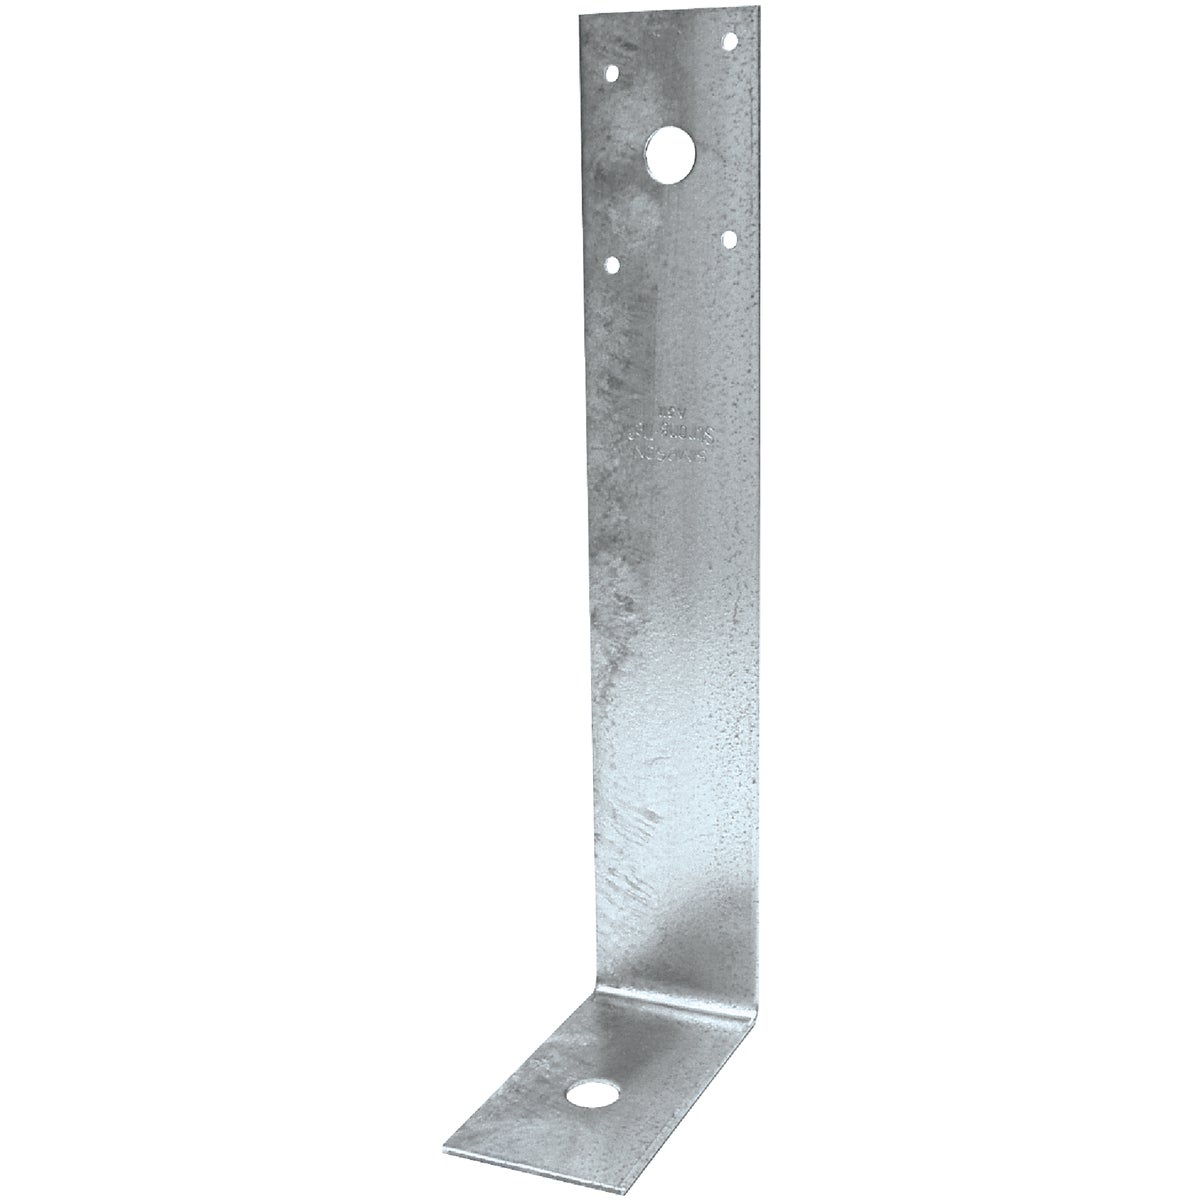 Simpson Strong-Tie A311 Simpson Strong-Tie 11 In. x 3-5/8 In. x 2 In. Galvanized Steel 12 ga Reinforcing Angle A311 Pack of 25